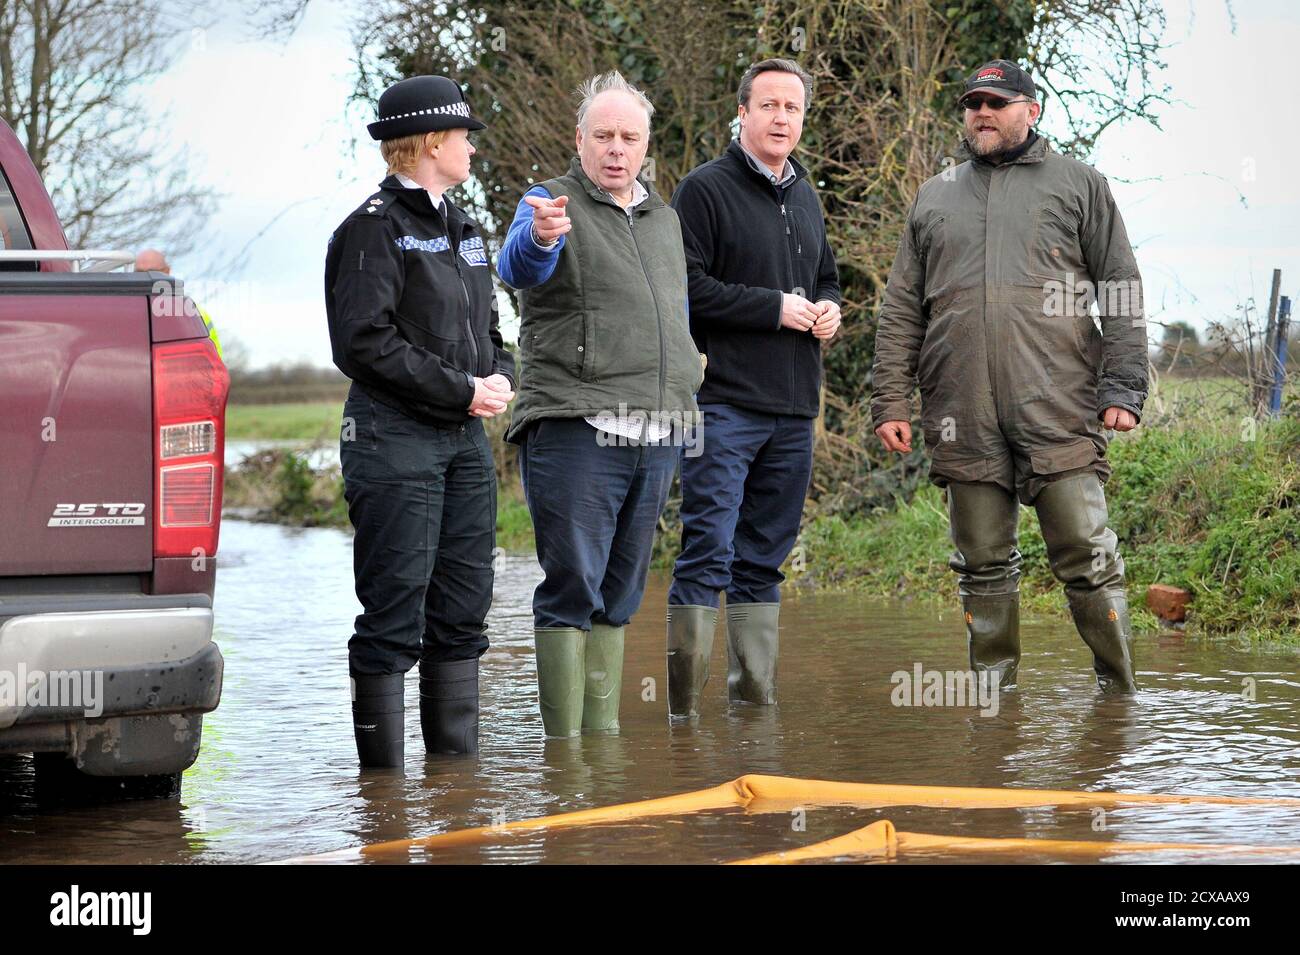 Britain's Prime Minister David Cameron (2nd R) with Bridgwater and West Somerset  MP Ian Liddell-Grainger (2nd L), chat with farmer Tony Davy (R) during a visit flood affected areas at Goodings Farm in Fordgate, Somerset February 7, 2014.   REUTERS/Tim Ireland/Pool (BRITAIN - Tags: ENVIRONMENT DISASTER POLITICS) Stock Photo